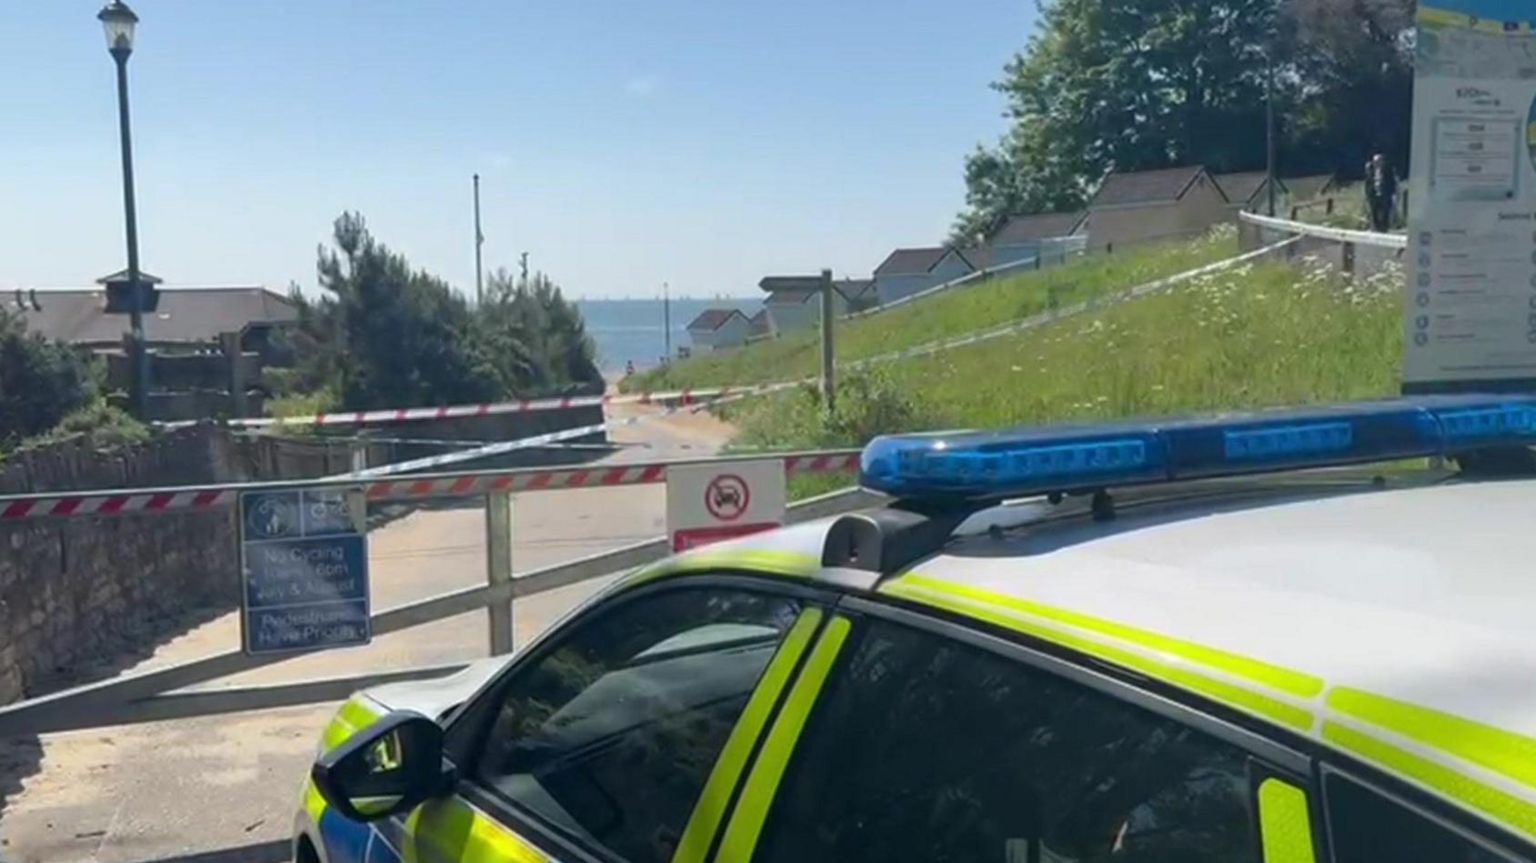 Police cordon at Durley Chine Beach